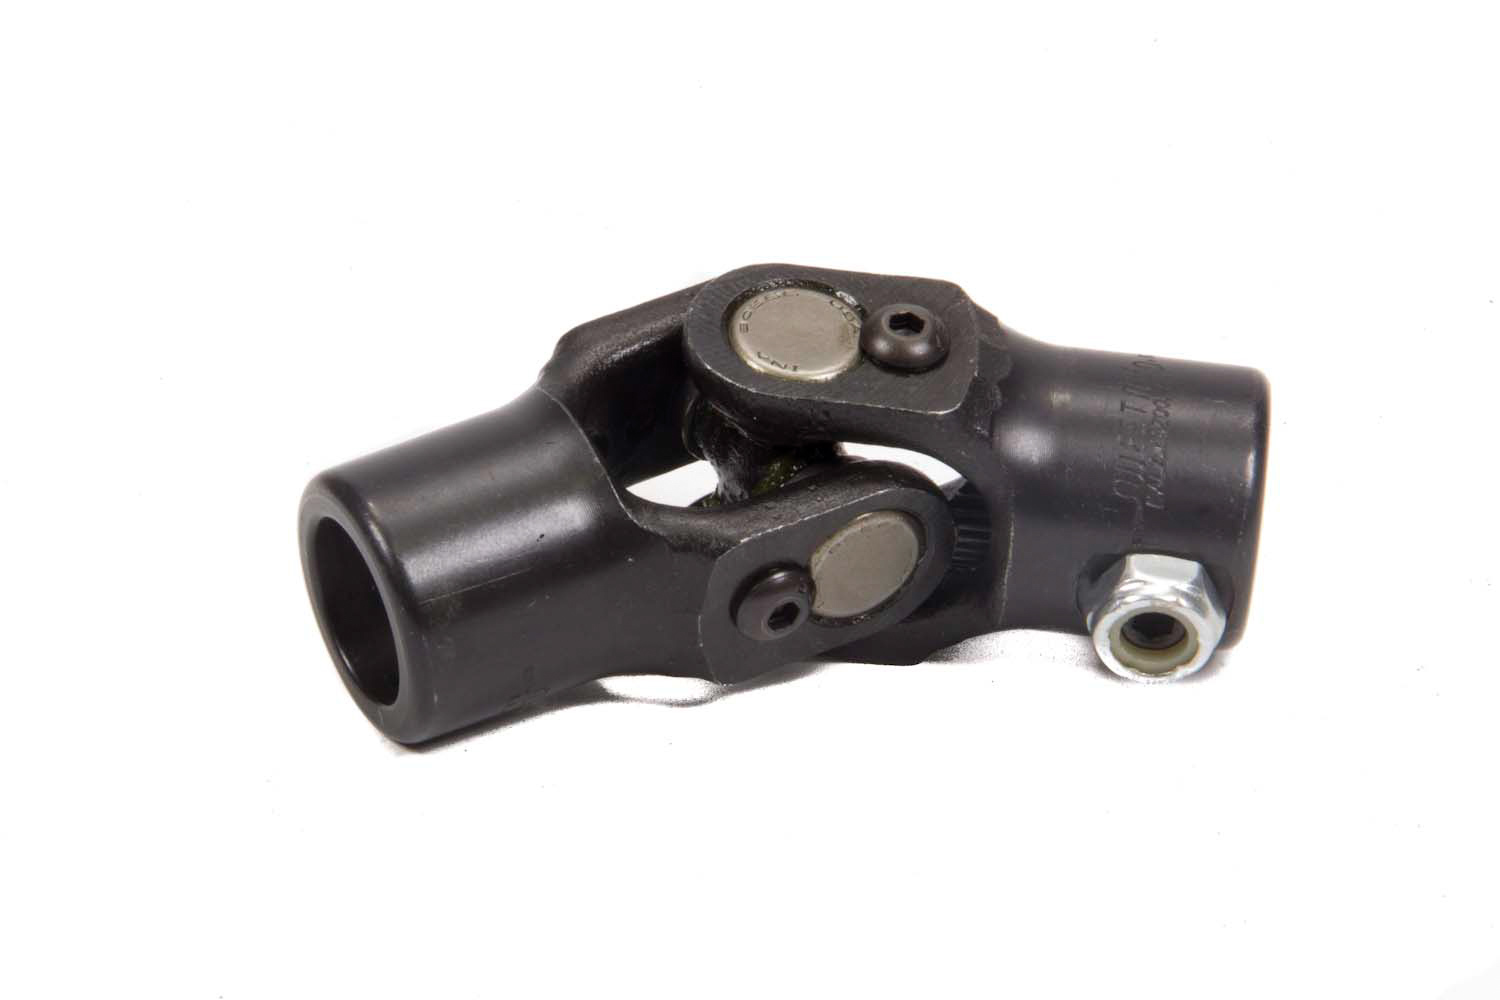 Steering Universal Joint - Single Joint - 3/4 in Smooth Bore to 3/4 in 20 Spline - Steel - Black Paint - Each